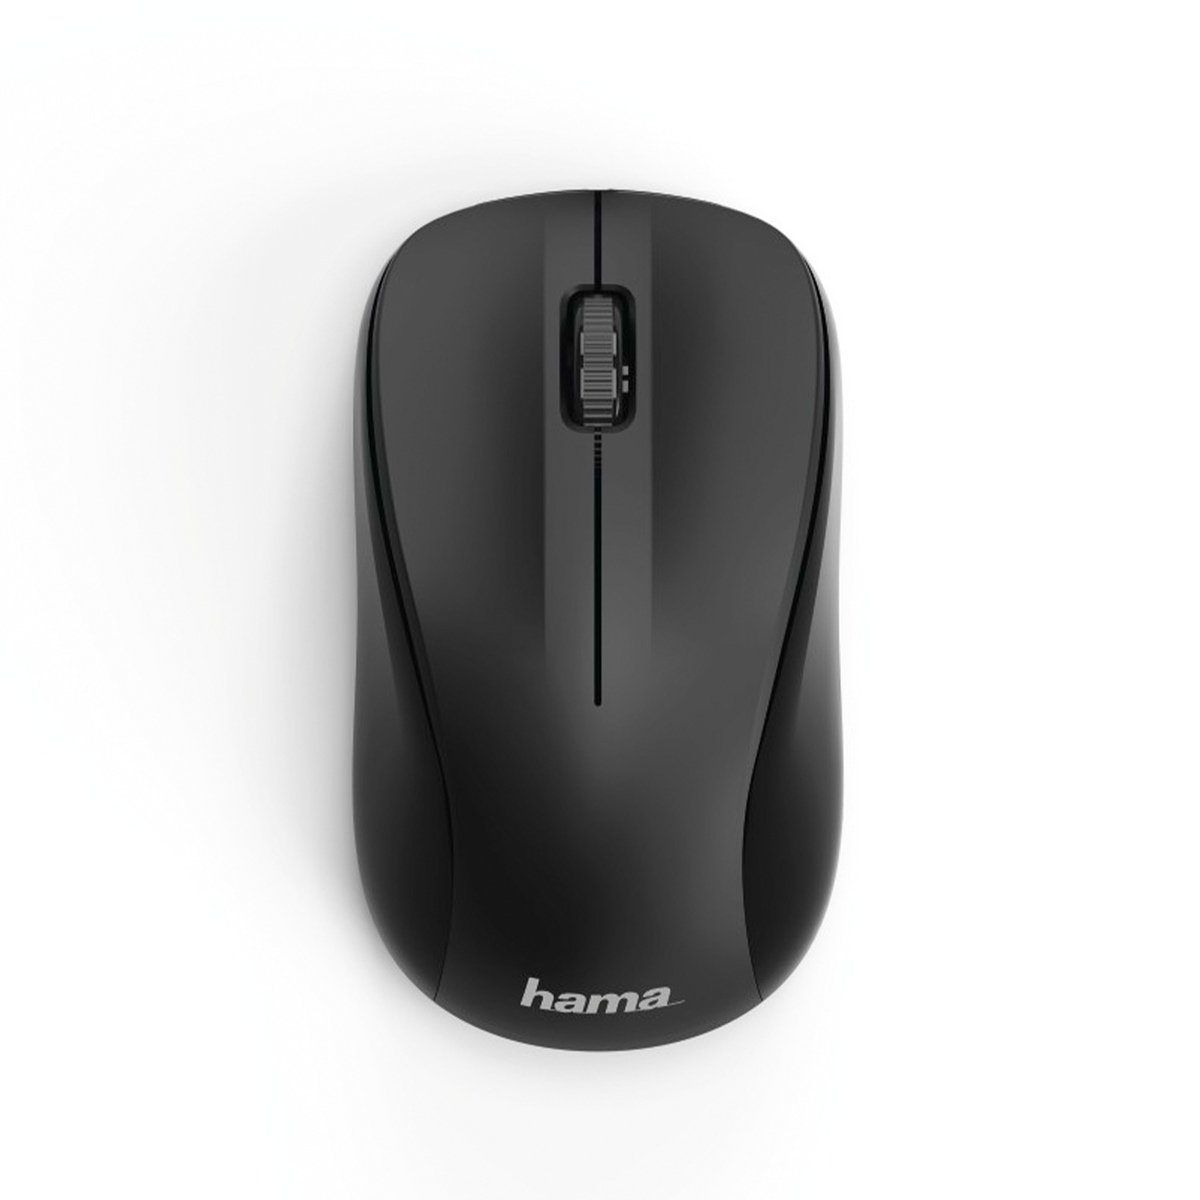 Hama MW-300 Optical Wireless Mouse, 3 Buttons, black